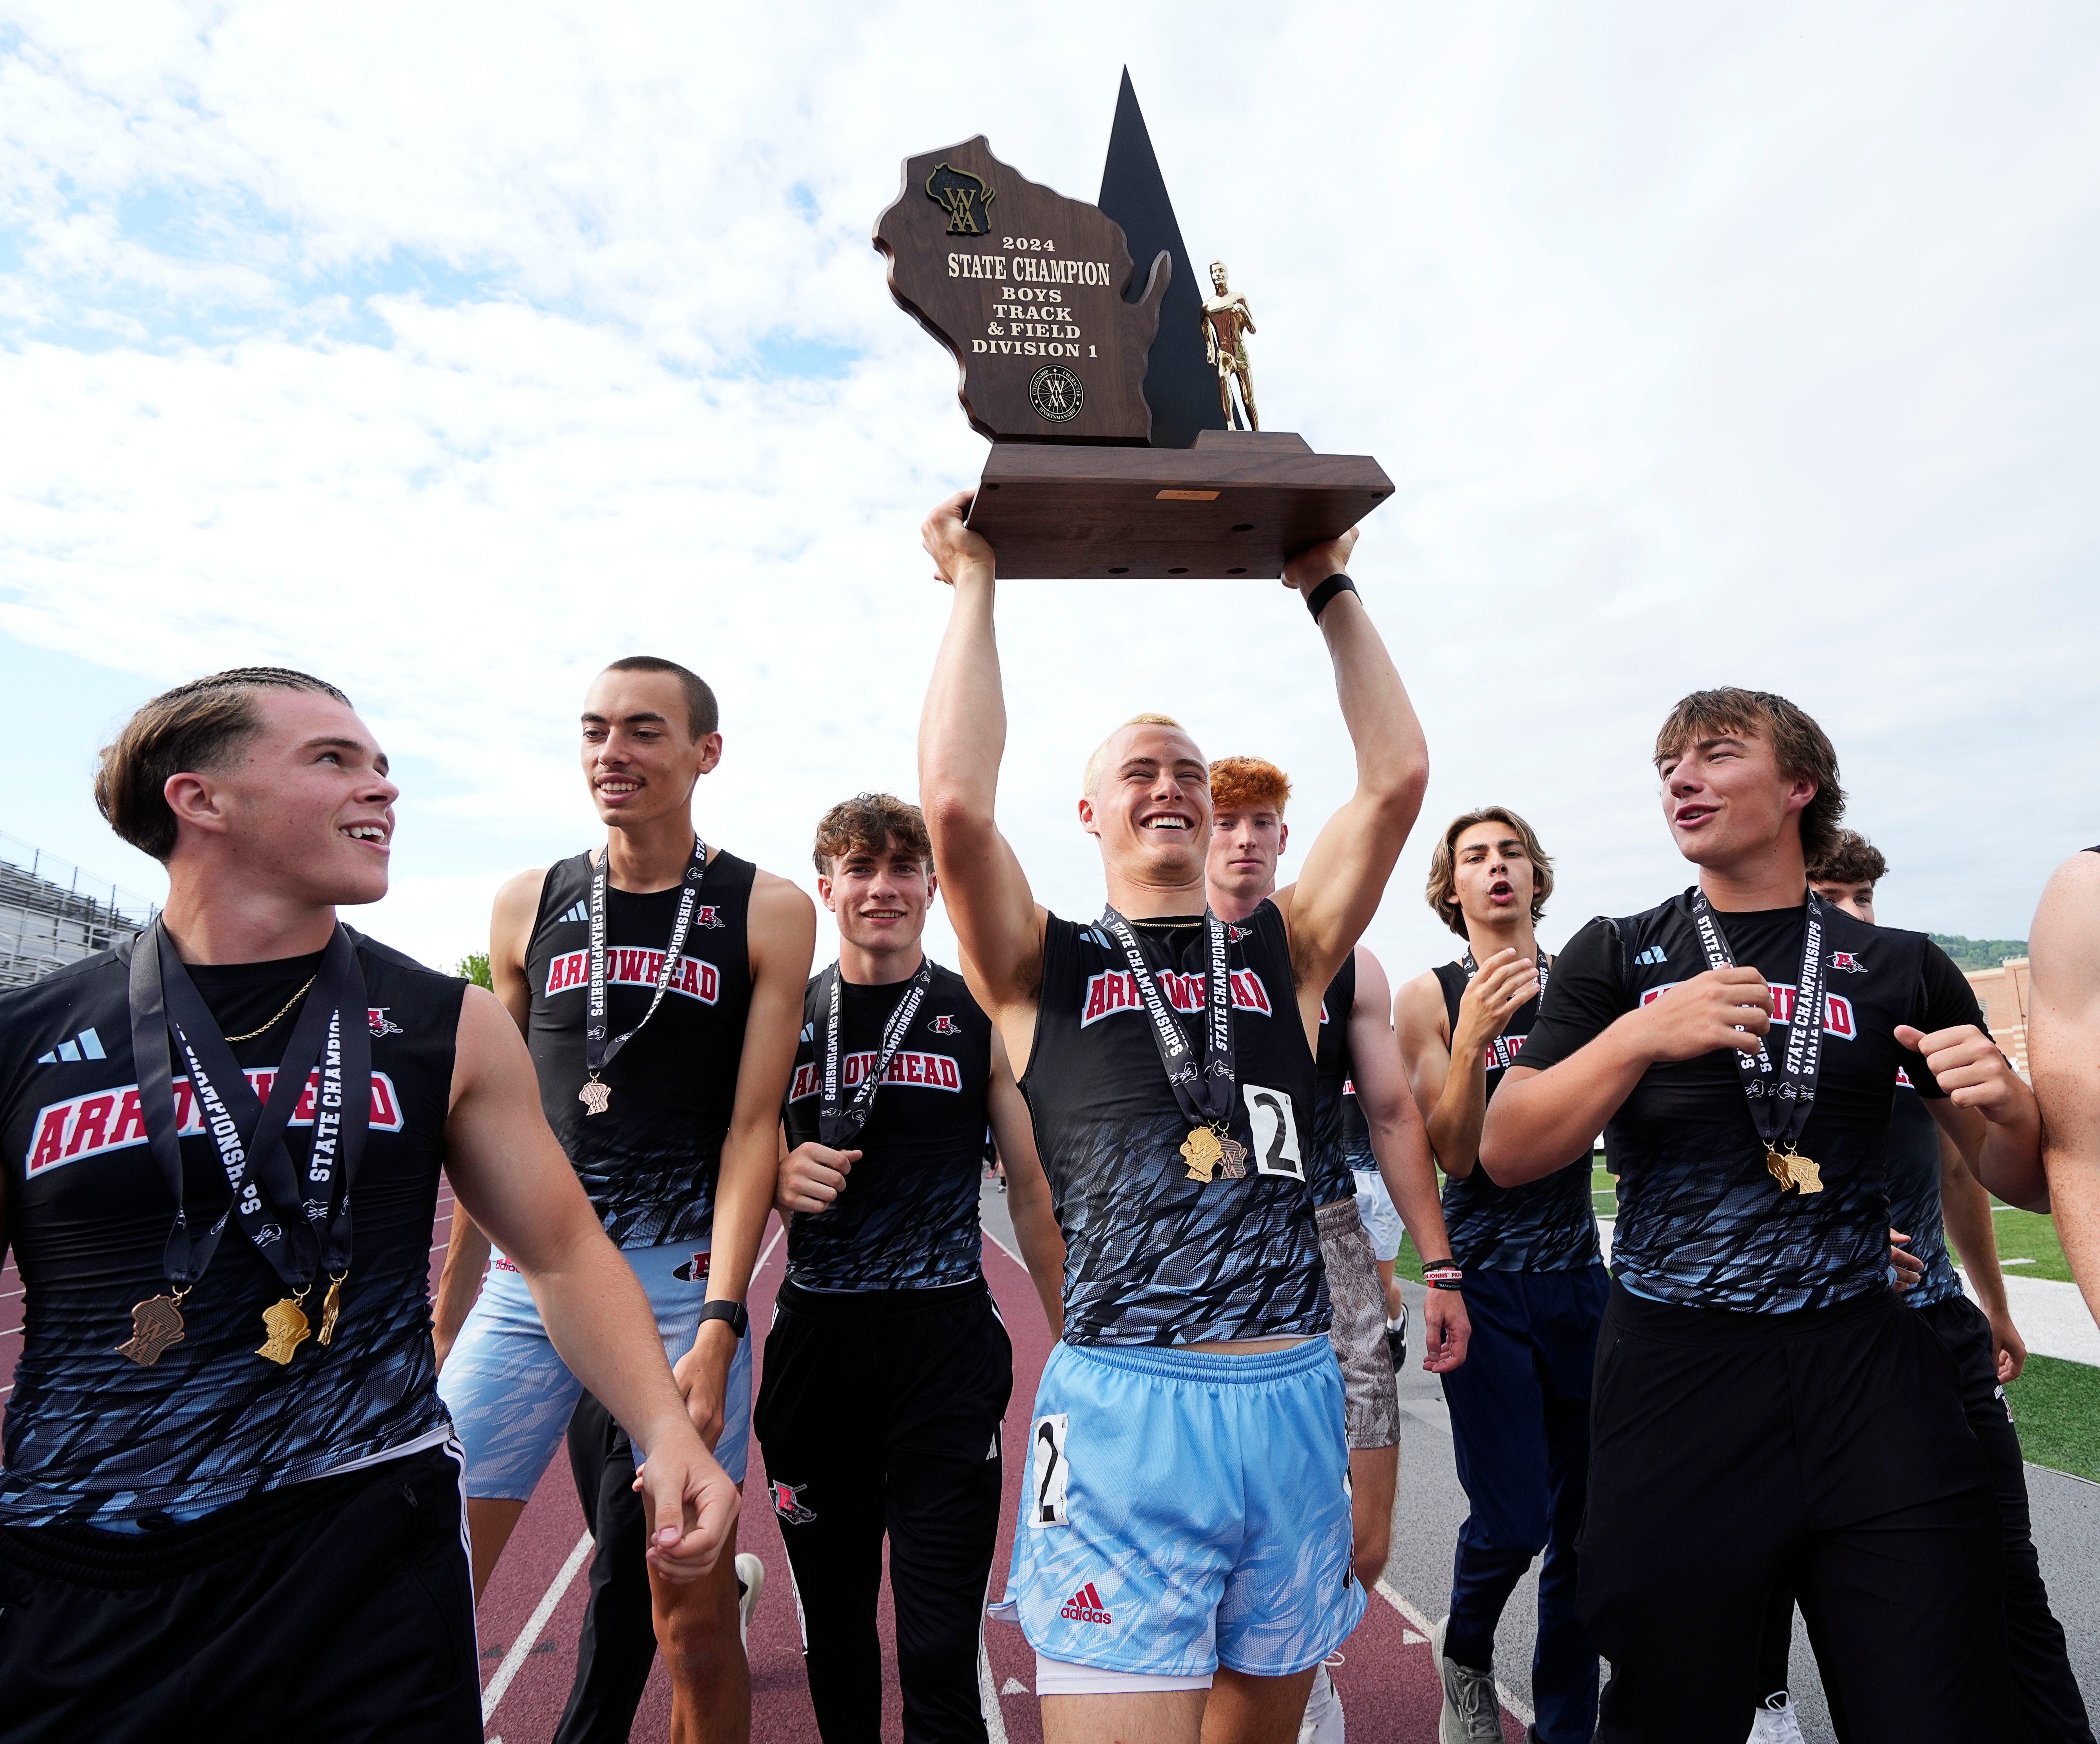 Arrowhead has historic day by winning first dual boys-girls track title in WIAA Division 1